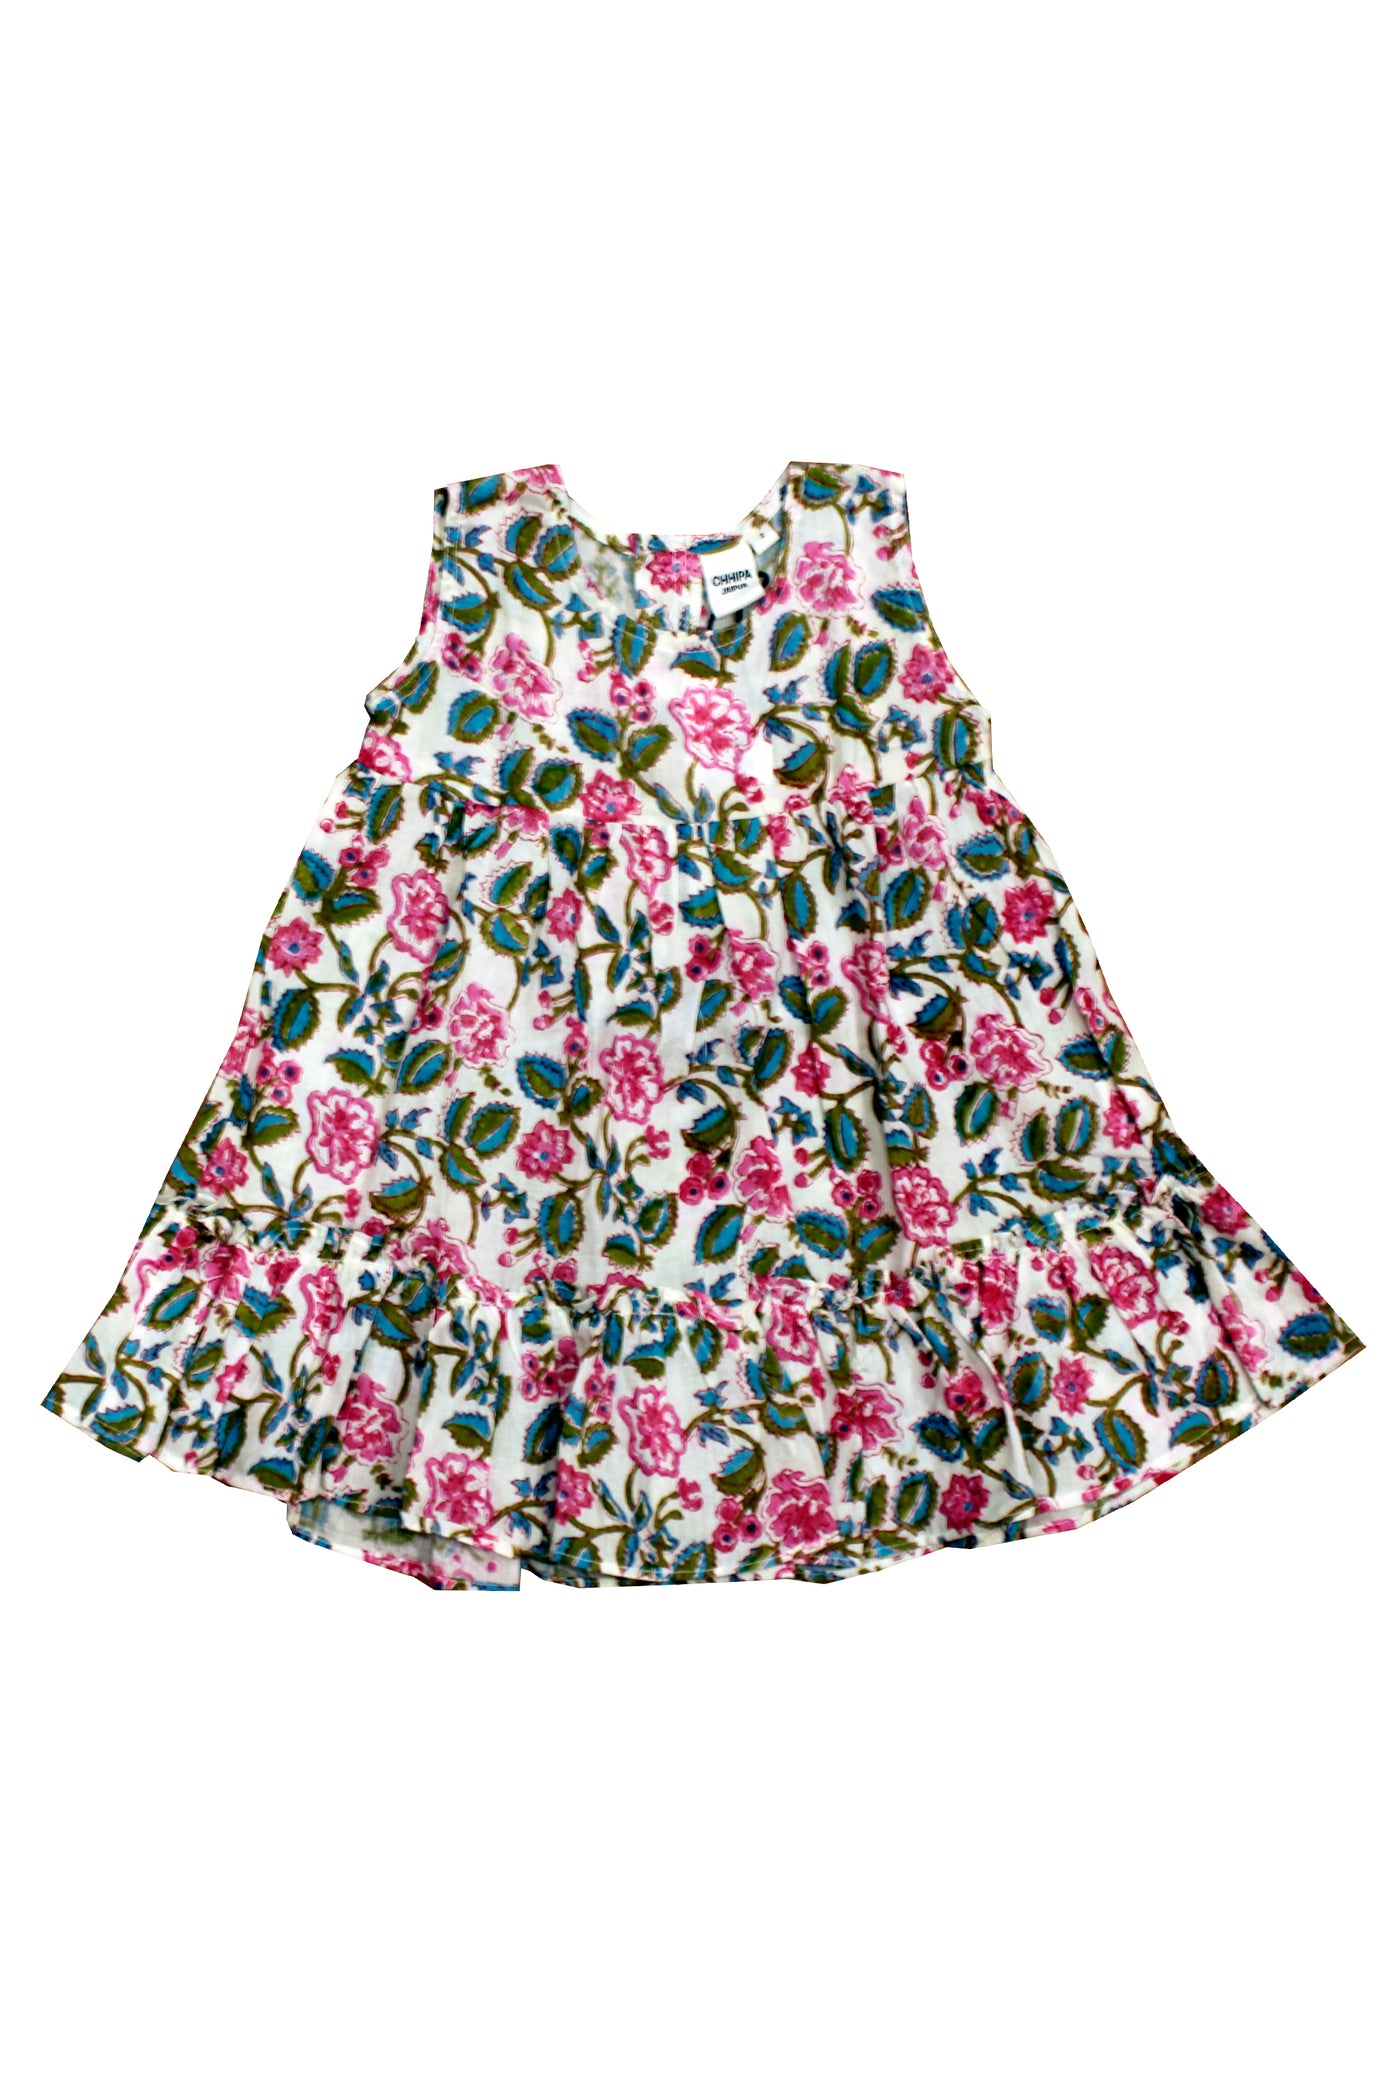 Cotton Floral Jaal Girls Frock in Pink